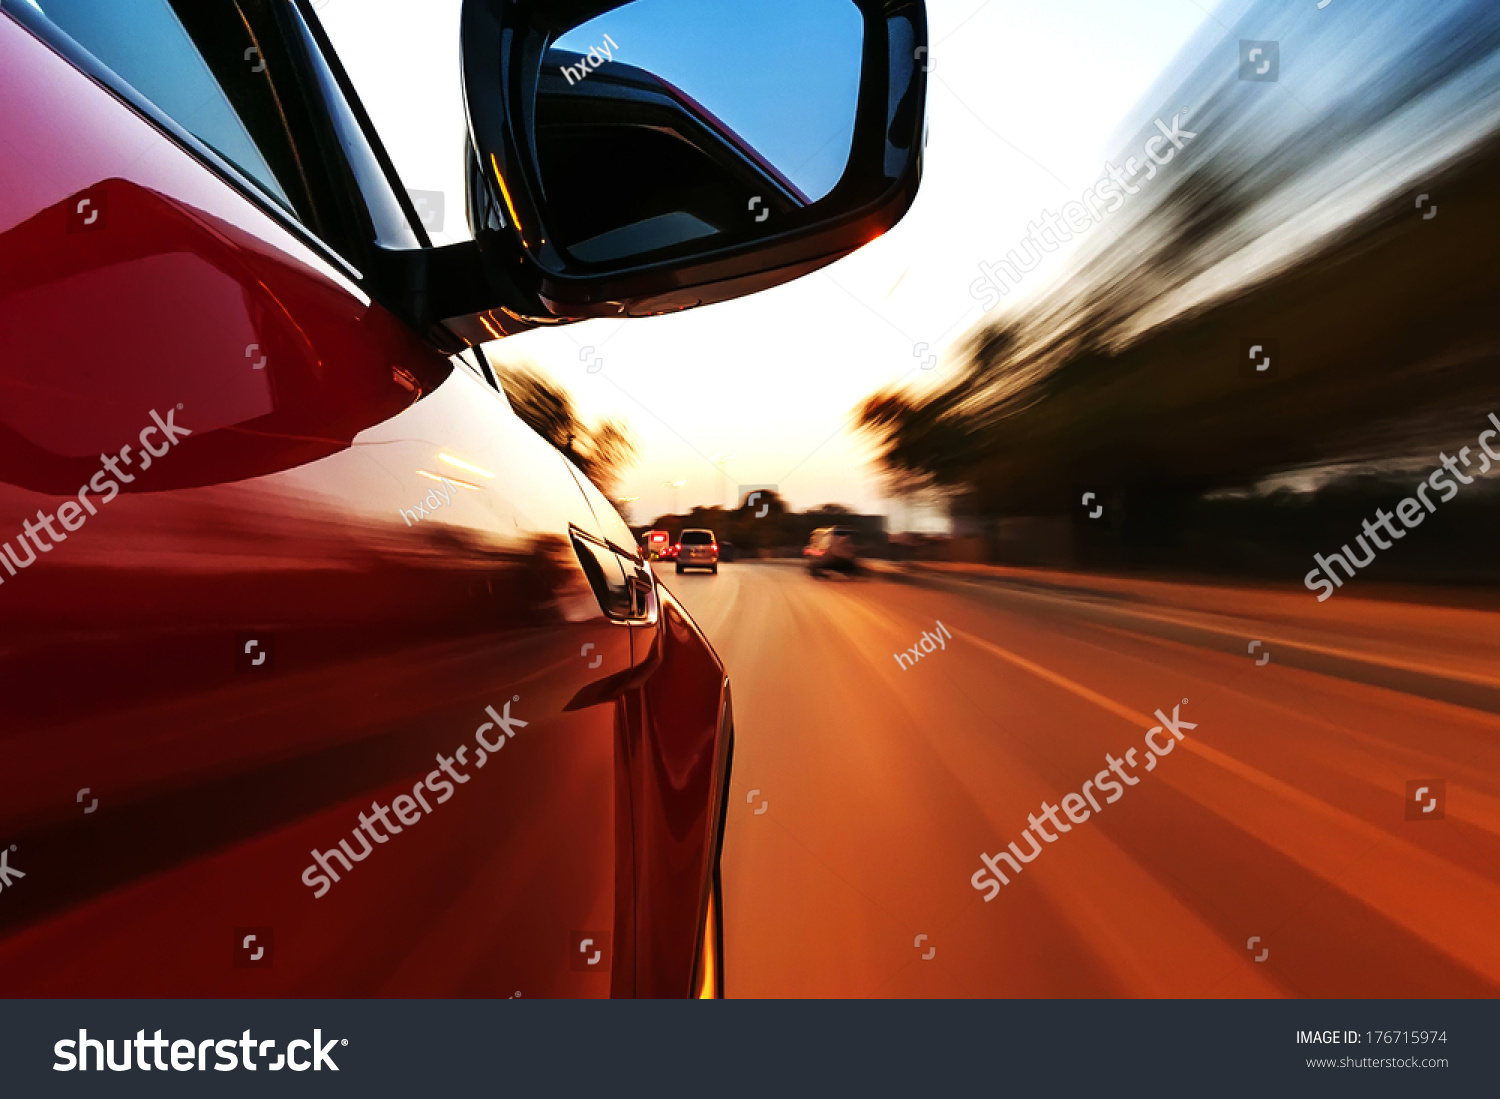 Car On The Road With Motion Blur Background. Stock Photo ...